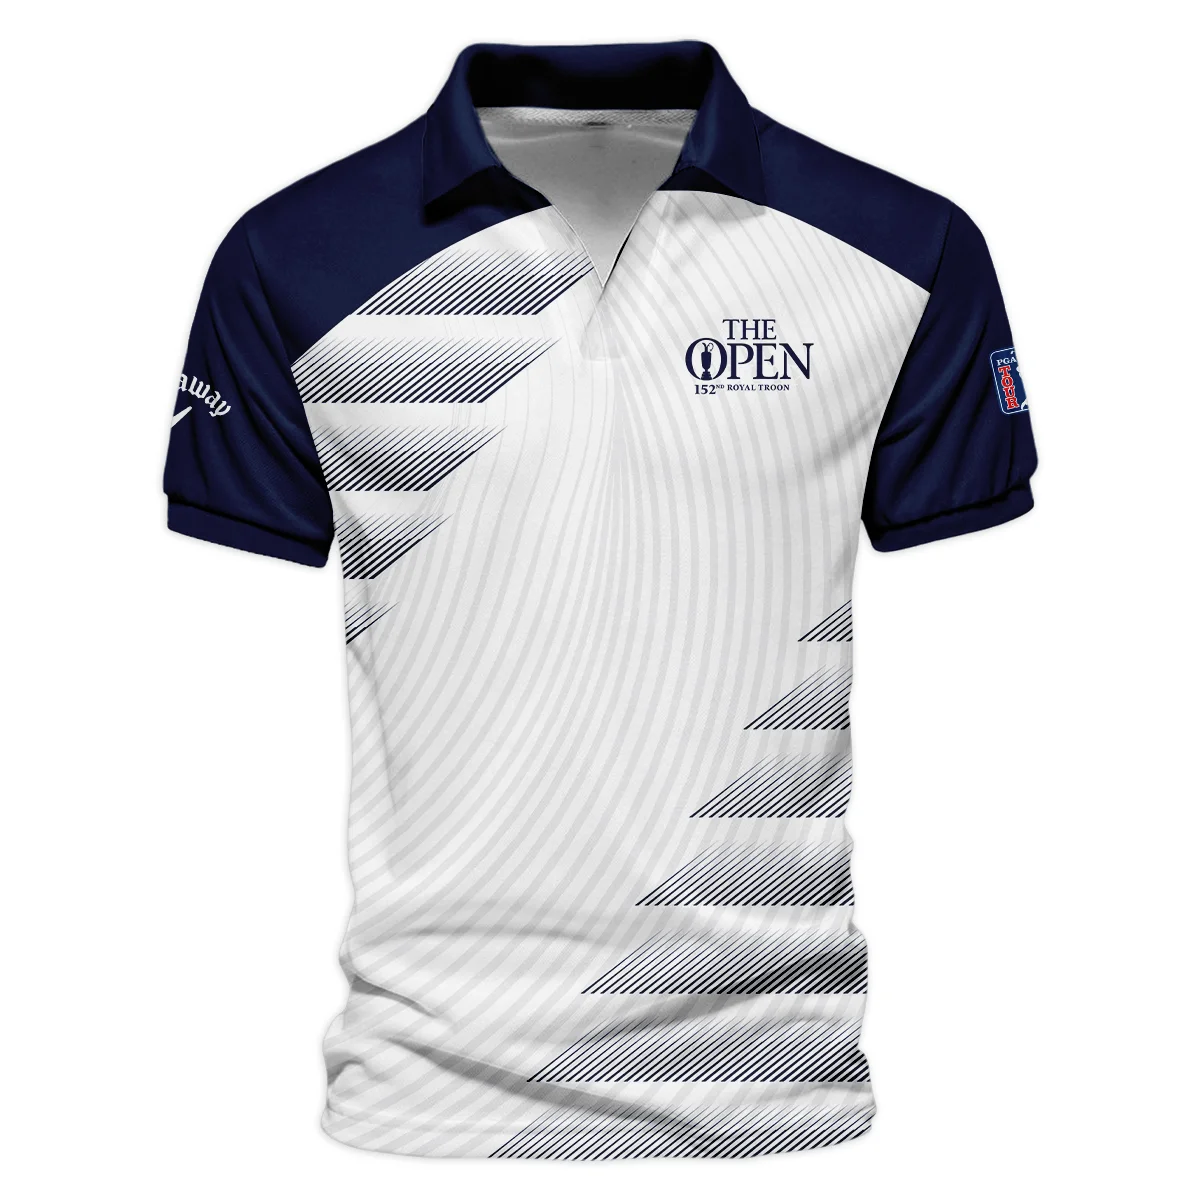 Callaway 152nd Open Championship Blue White Line Pattern Sleeveless Jacket All Over Prints HOTOP280624A02CLWSJK